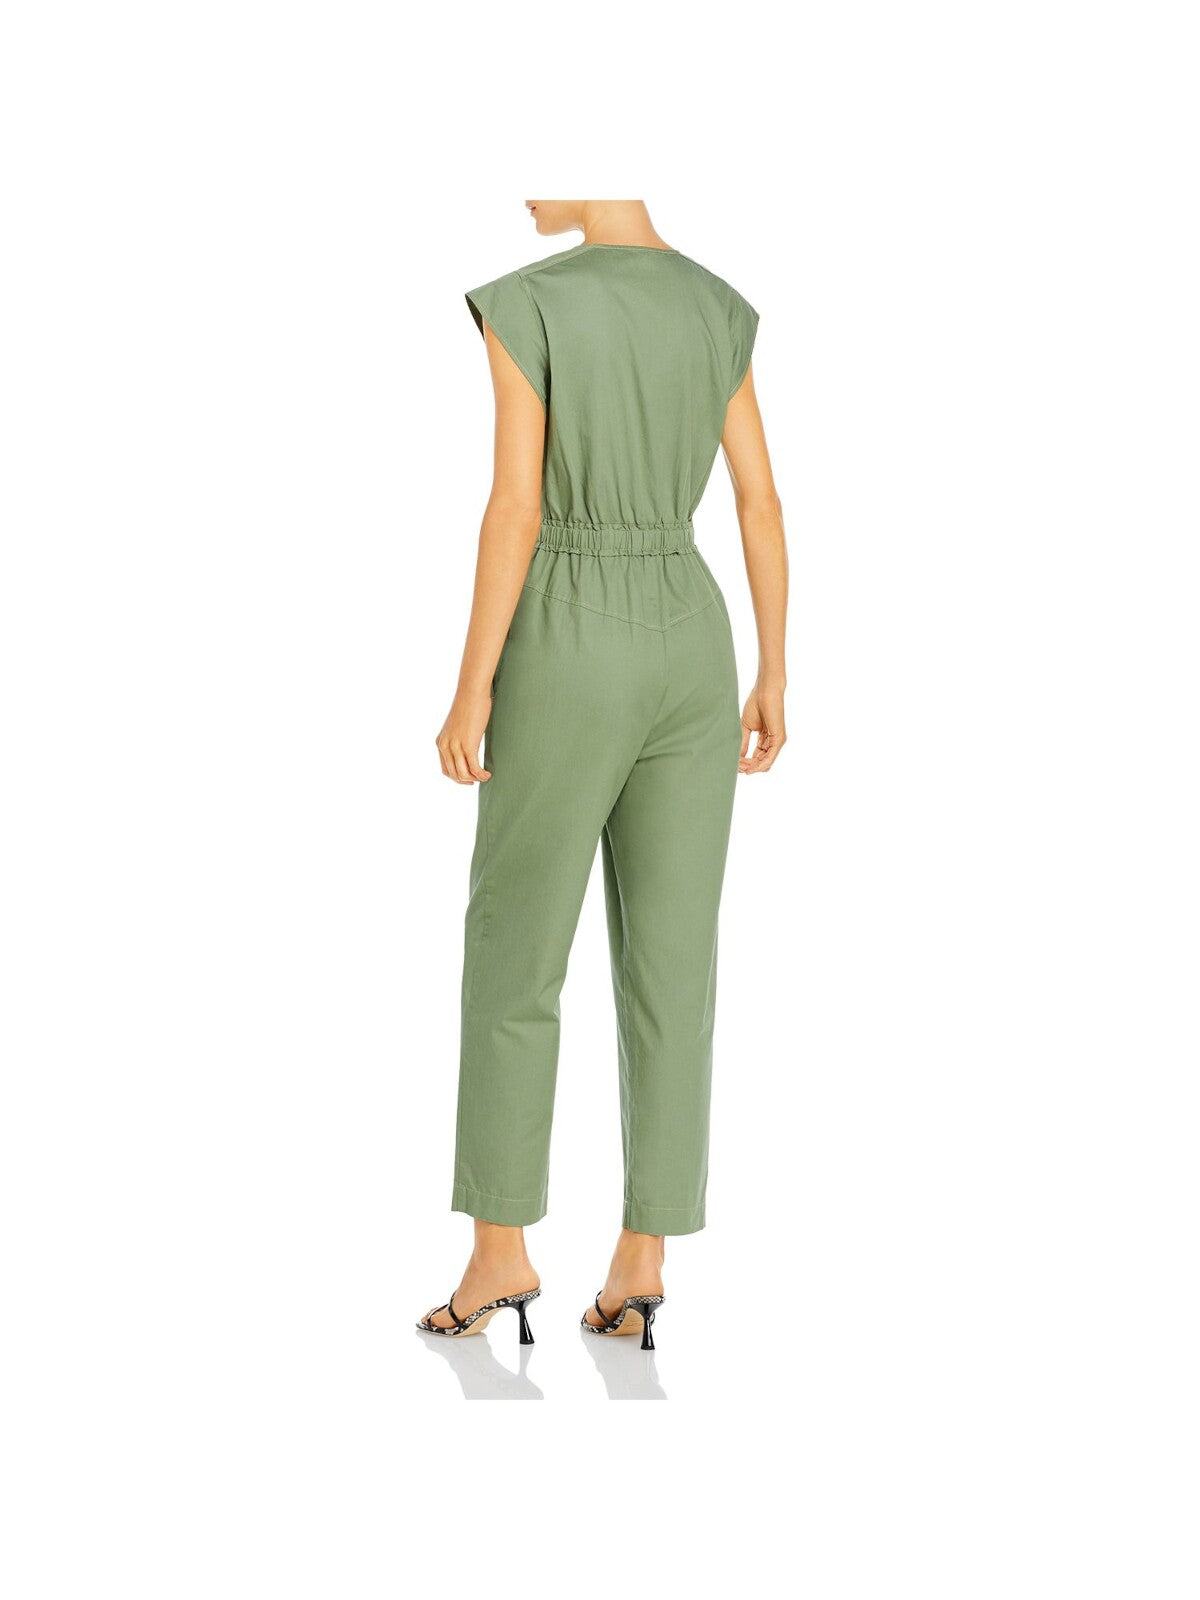 LA VIE BY REBECCA TAYLOR Womens Green Pocketed Tie Button Pleated Drawstring Cap Sleeve Jewel Neck Wear To Work Jumpsuit M